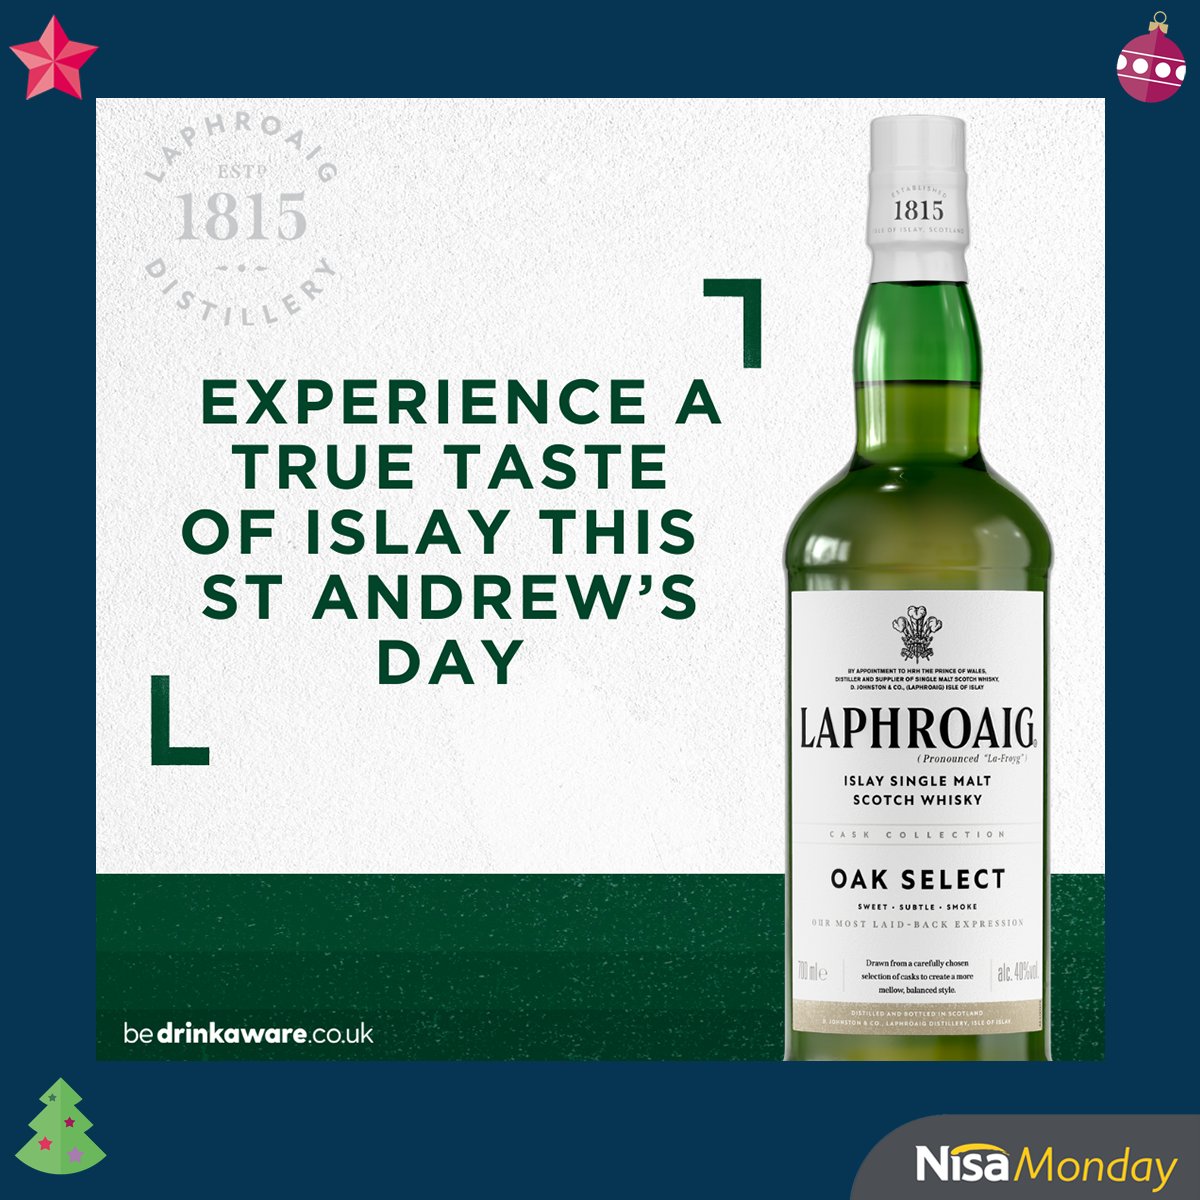 WIN with Laphroaig this #NisaMonday! 

RT+FOLLOW for your chance to WIN a bottle of Laphroaig and experience a true taste of Islay this St Andrew’s Day.

Closes: 26.11.23
T&C's: spr.ly/6019uNMaW